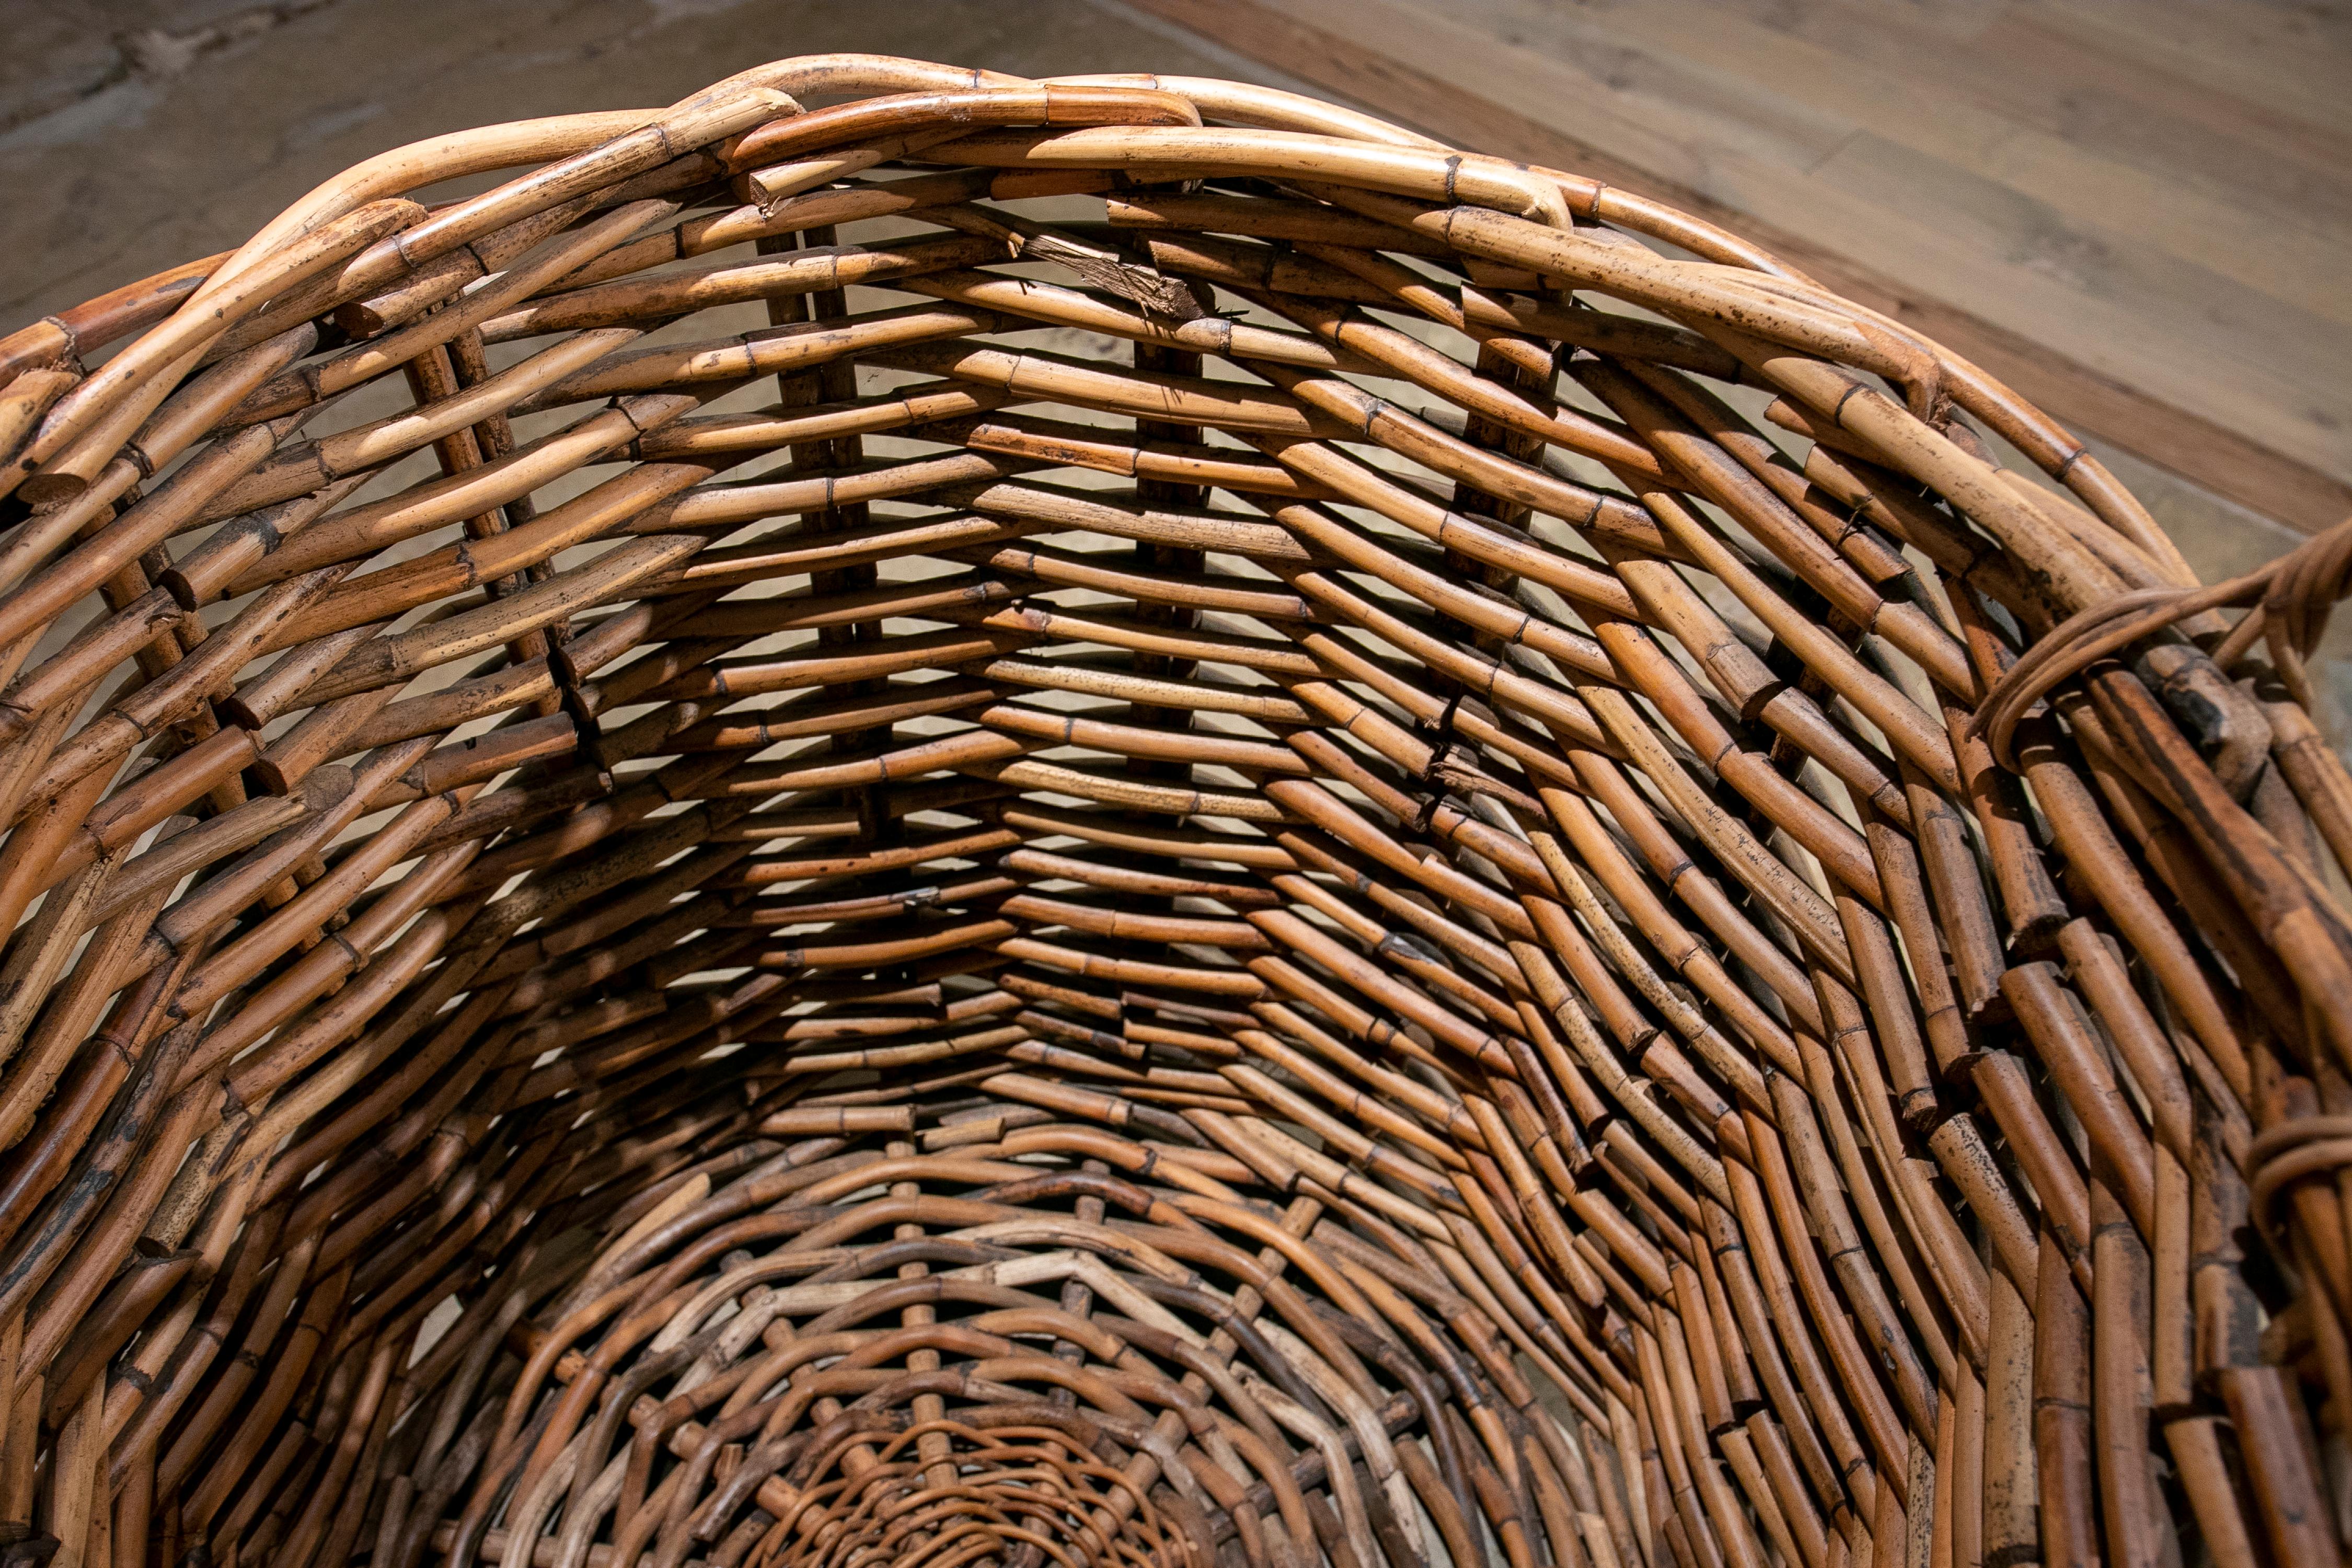 Handmade Large Bamboo Basket with Handles for Plants or Storage 1